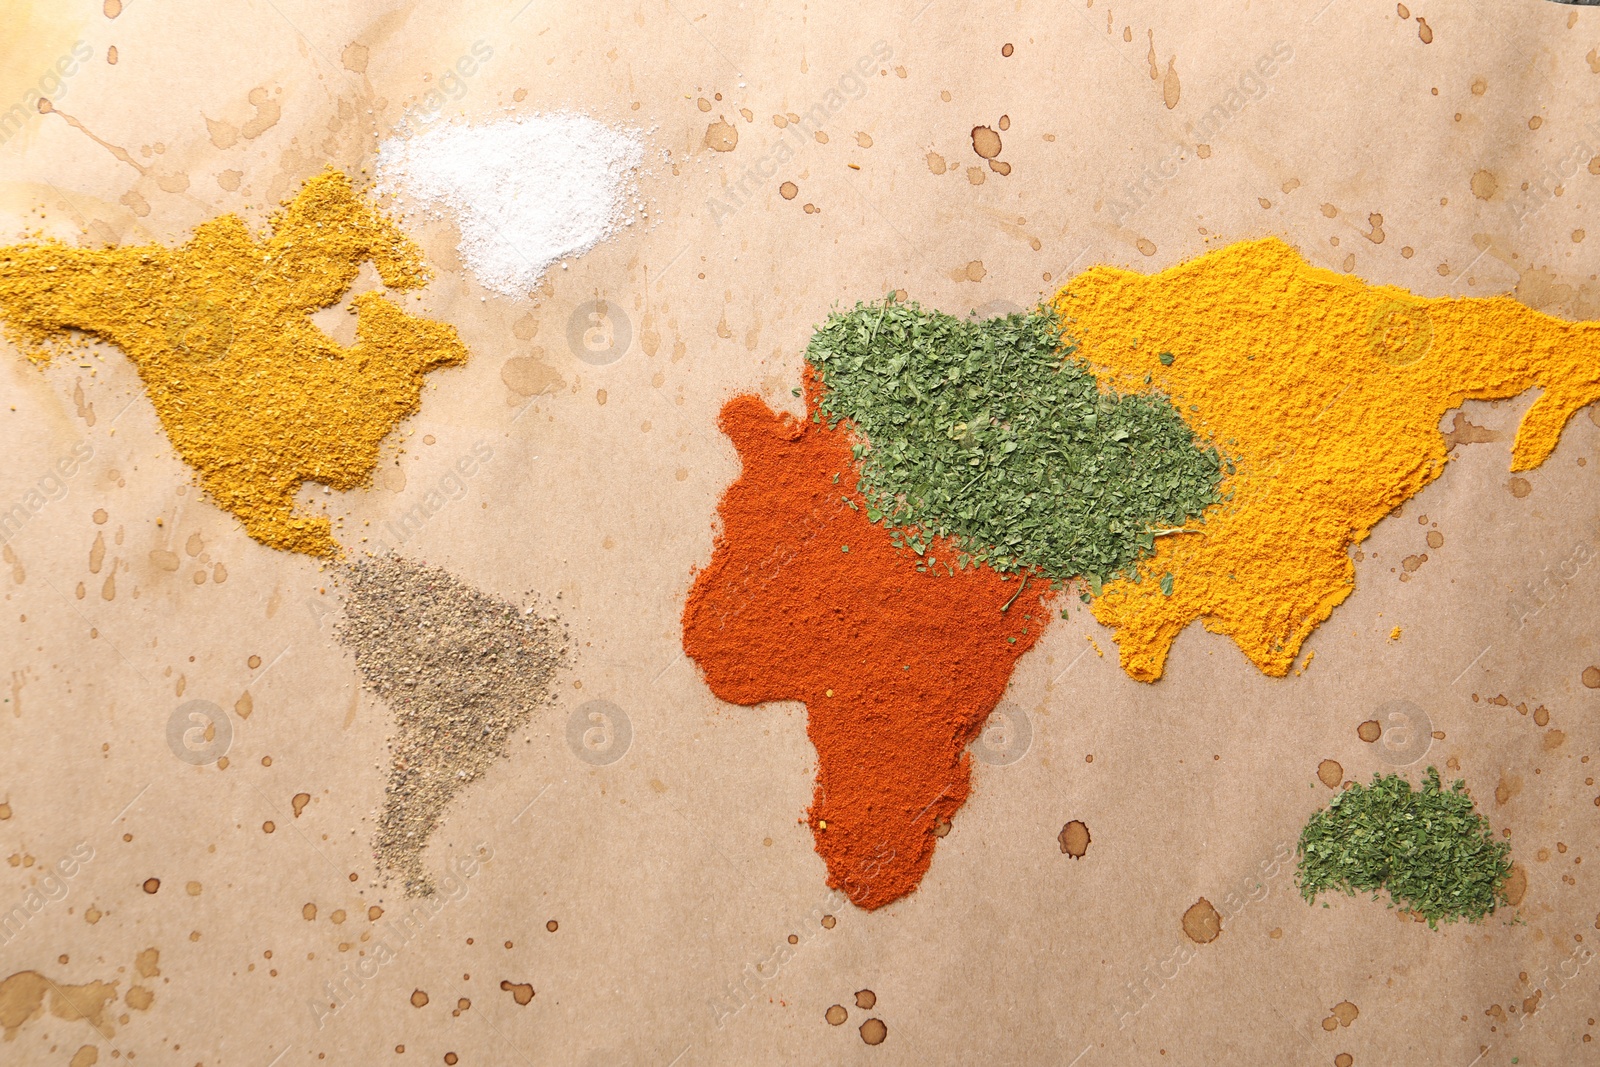 Photo of World map of different spices on old paper, flat lay